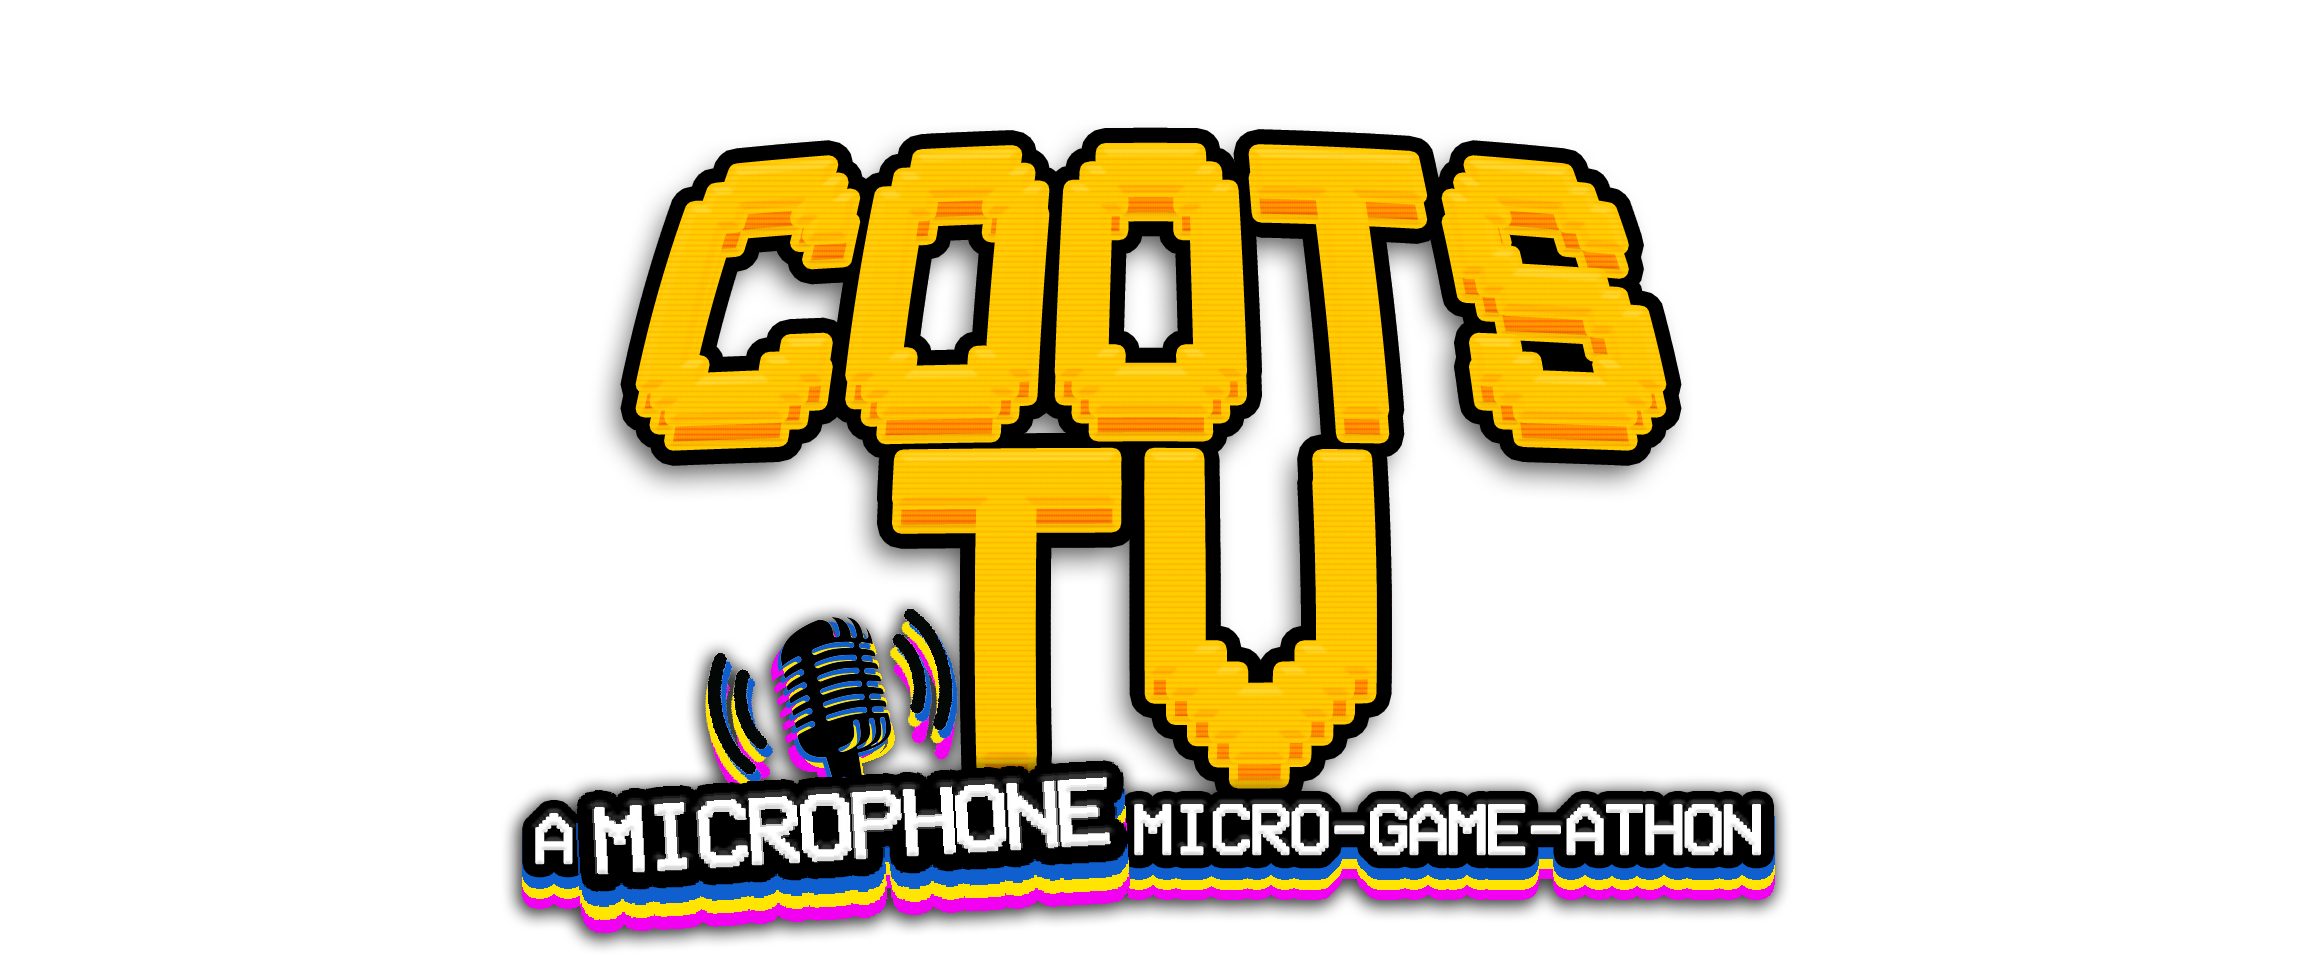 COOTS TV | A Microphone Micro-Game-Athon